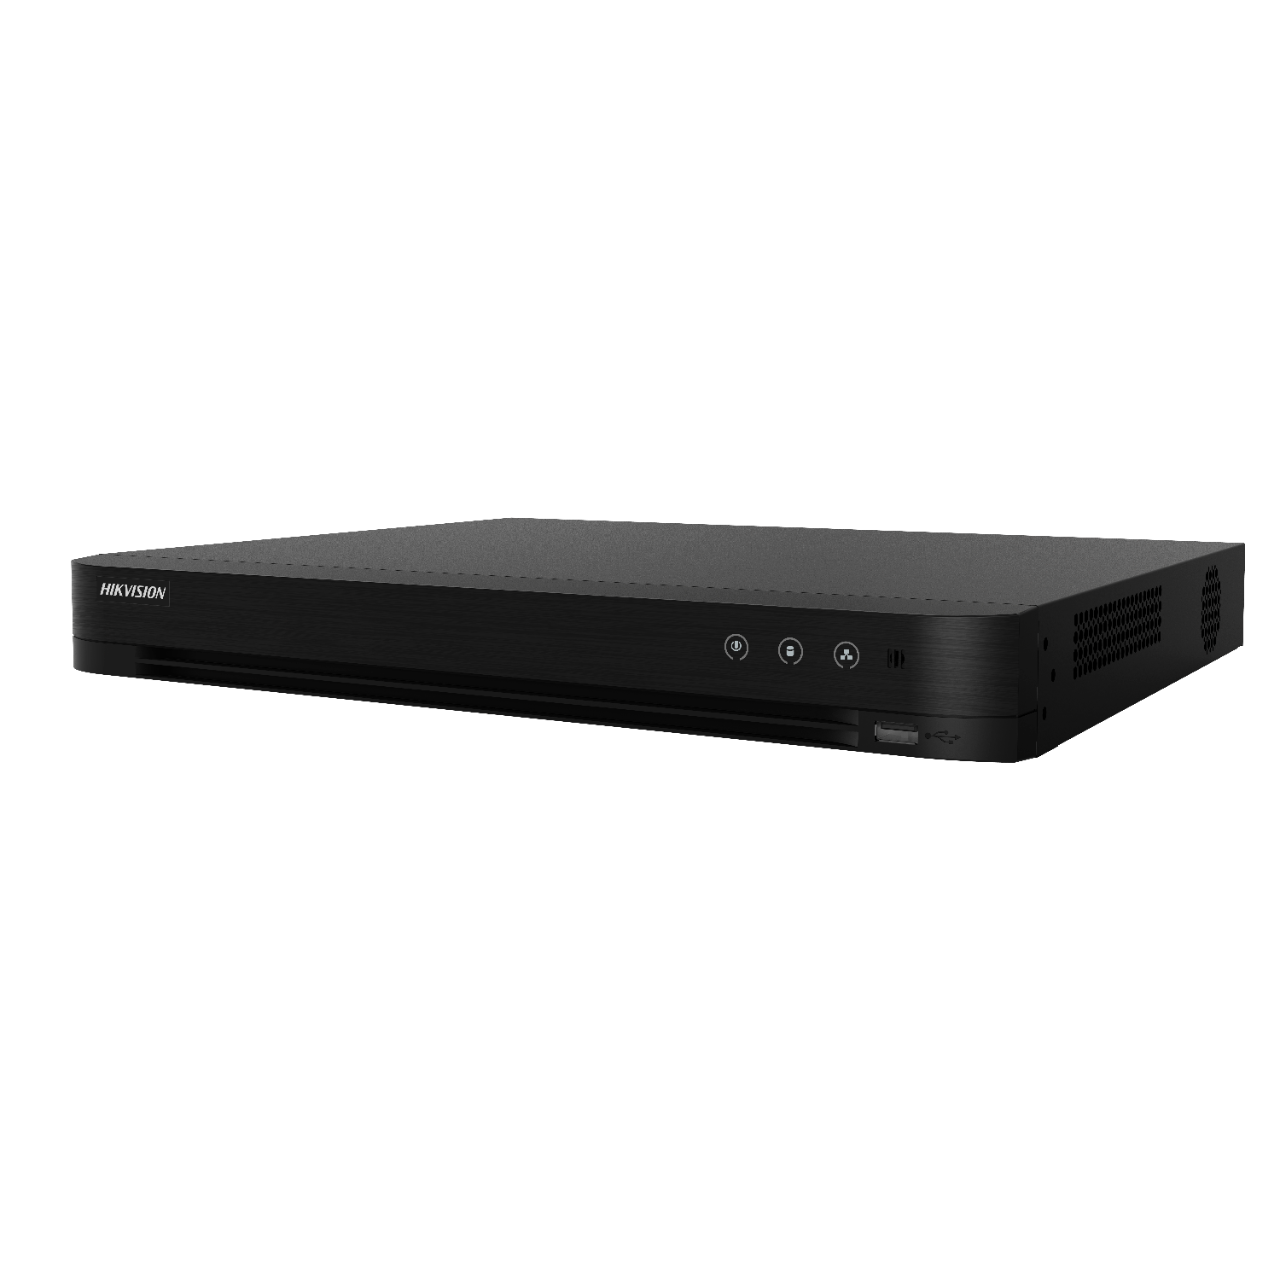 8 mp acusense - dvr 16 ch. video, audio 'over coaxial', vca, alarma 16in/4out - hikvision ids-7216huhi-m2-s(a)